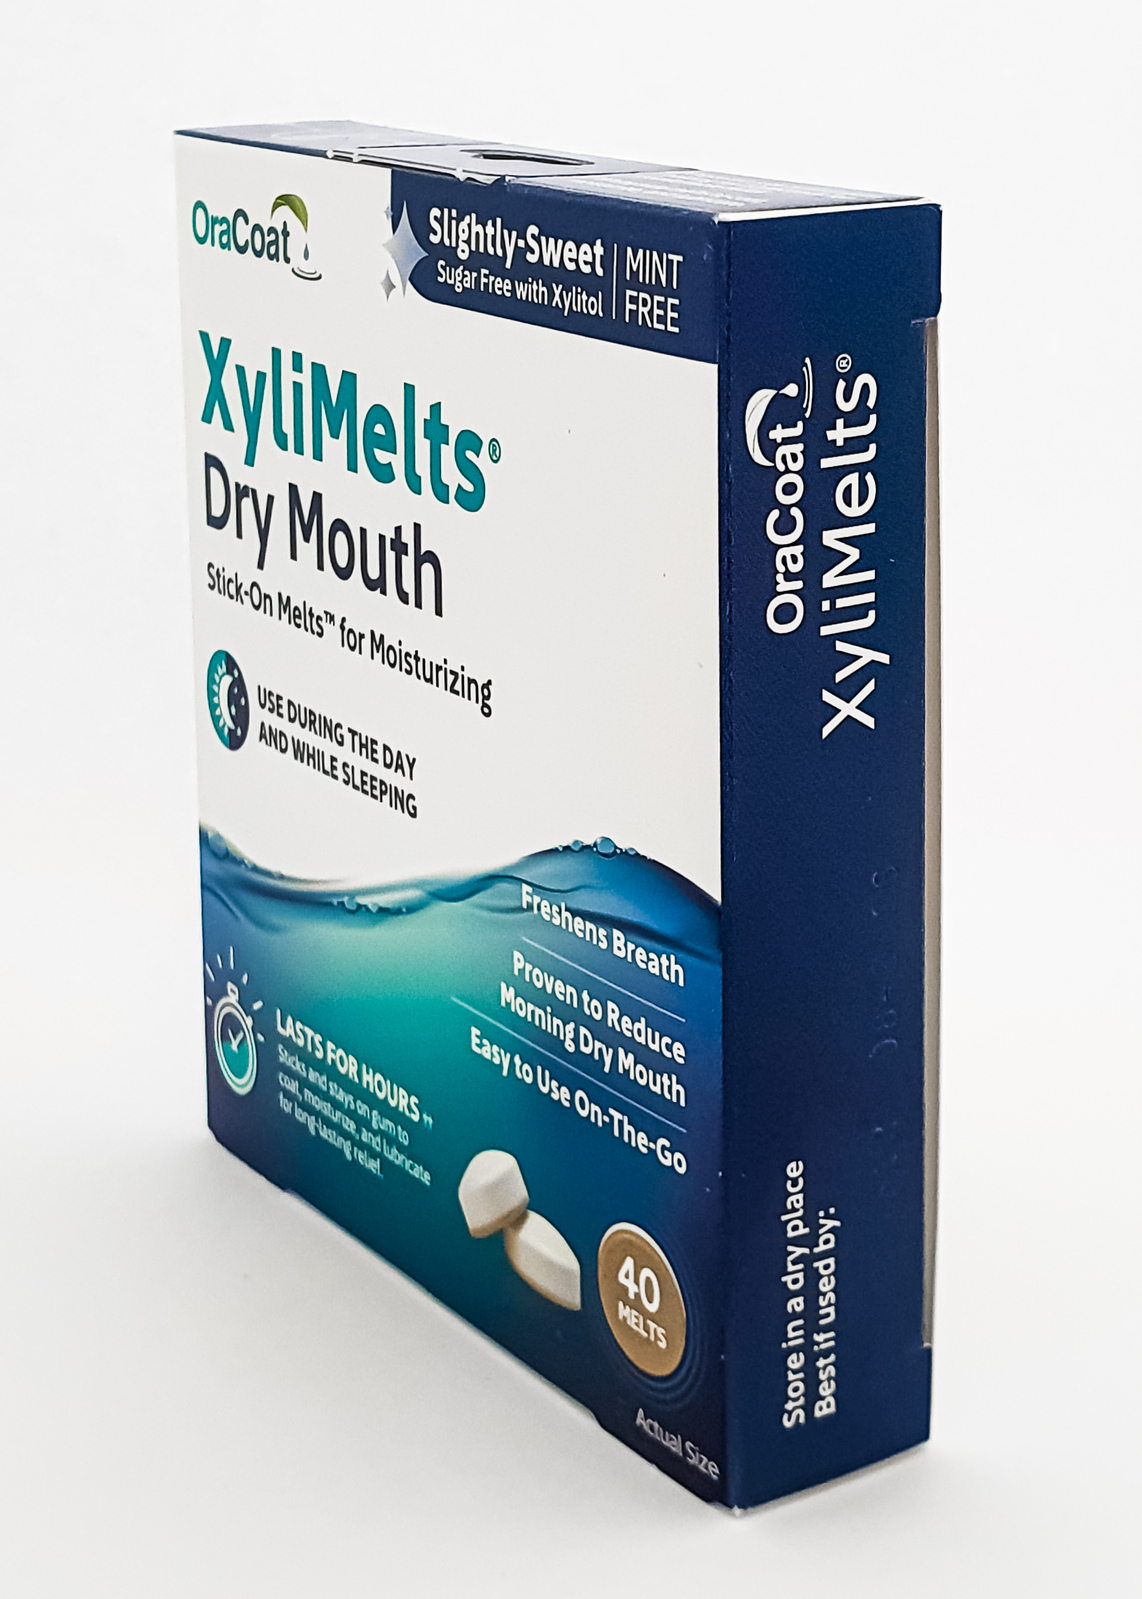 OraCoat XyliMelts Dry Mouth Relief Moisturizing Oral Adhering Discs Mild  Mint with Xylitol, for Dry Mouth, Stimulates Saliva, Non-Acidic, Day and